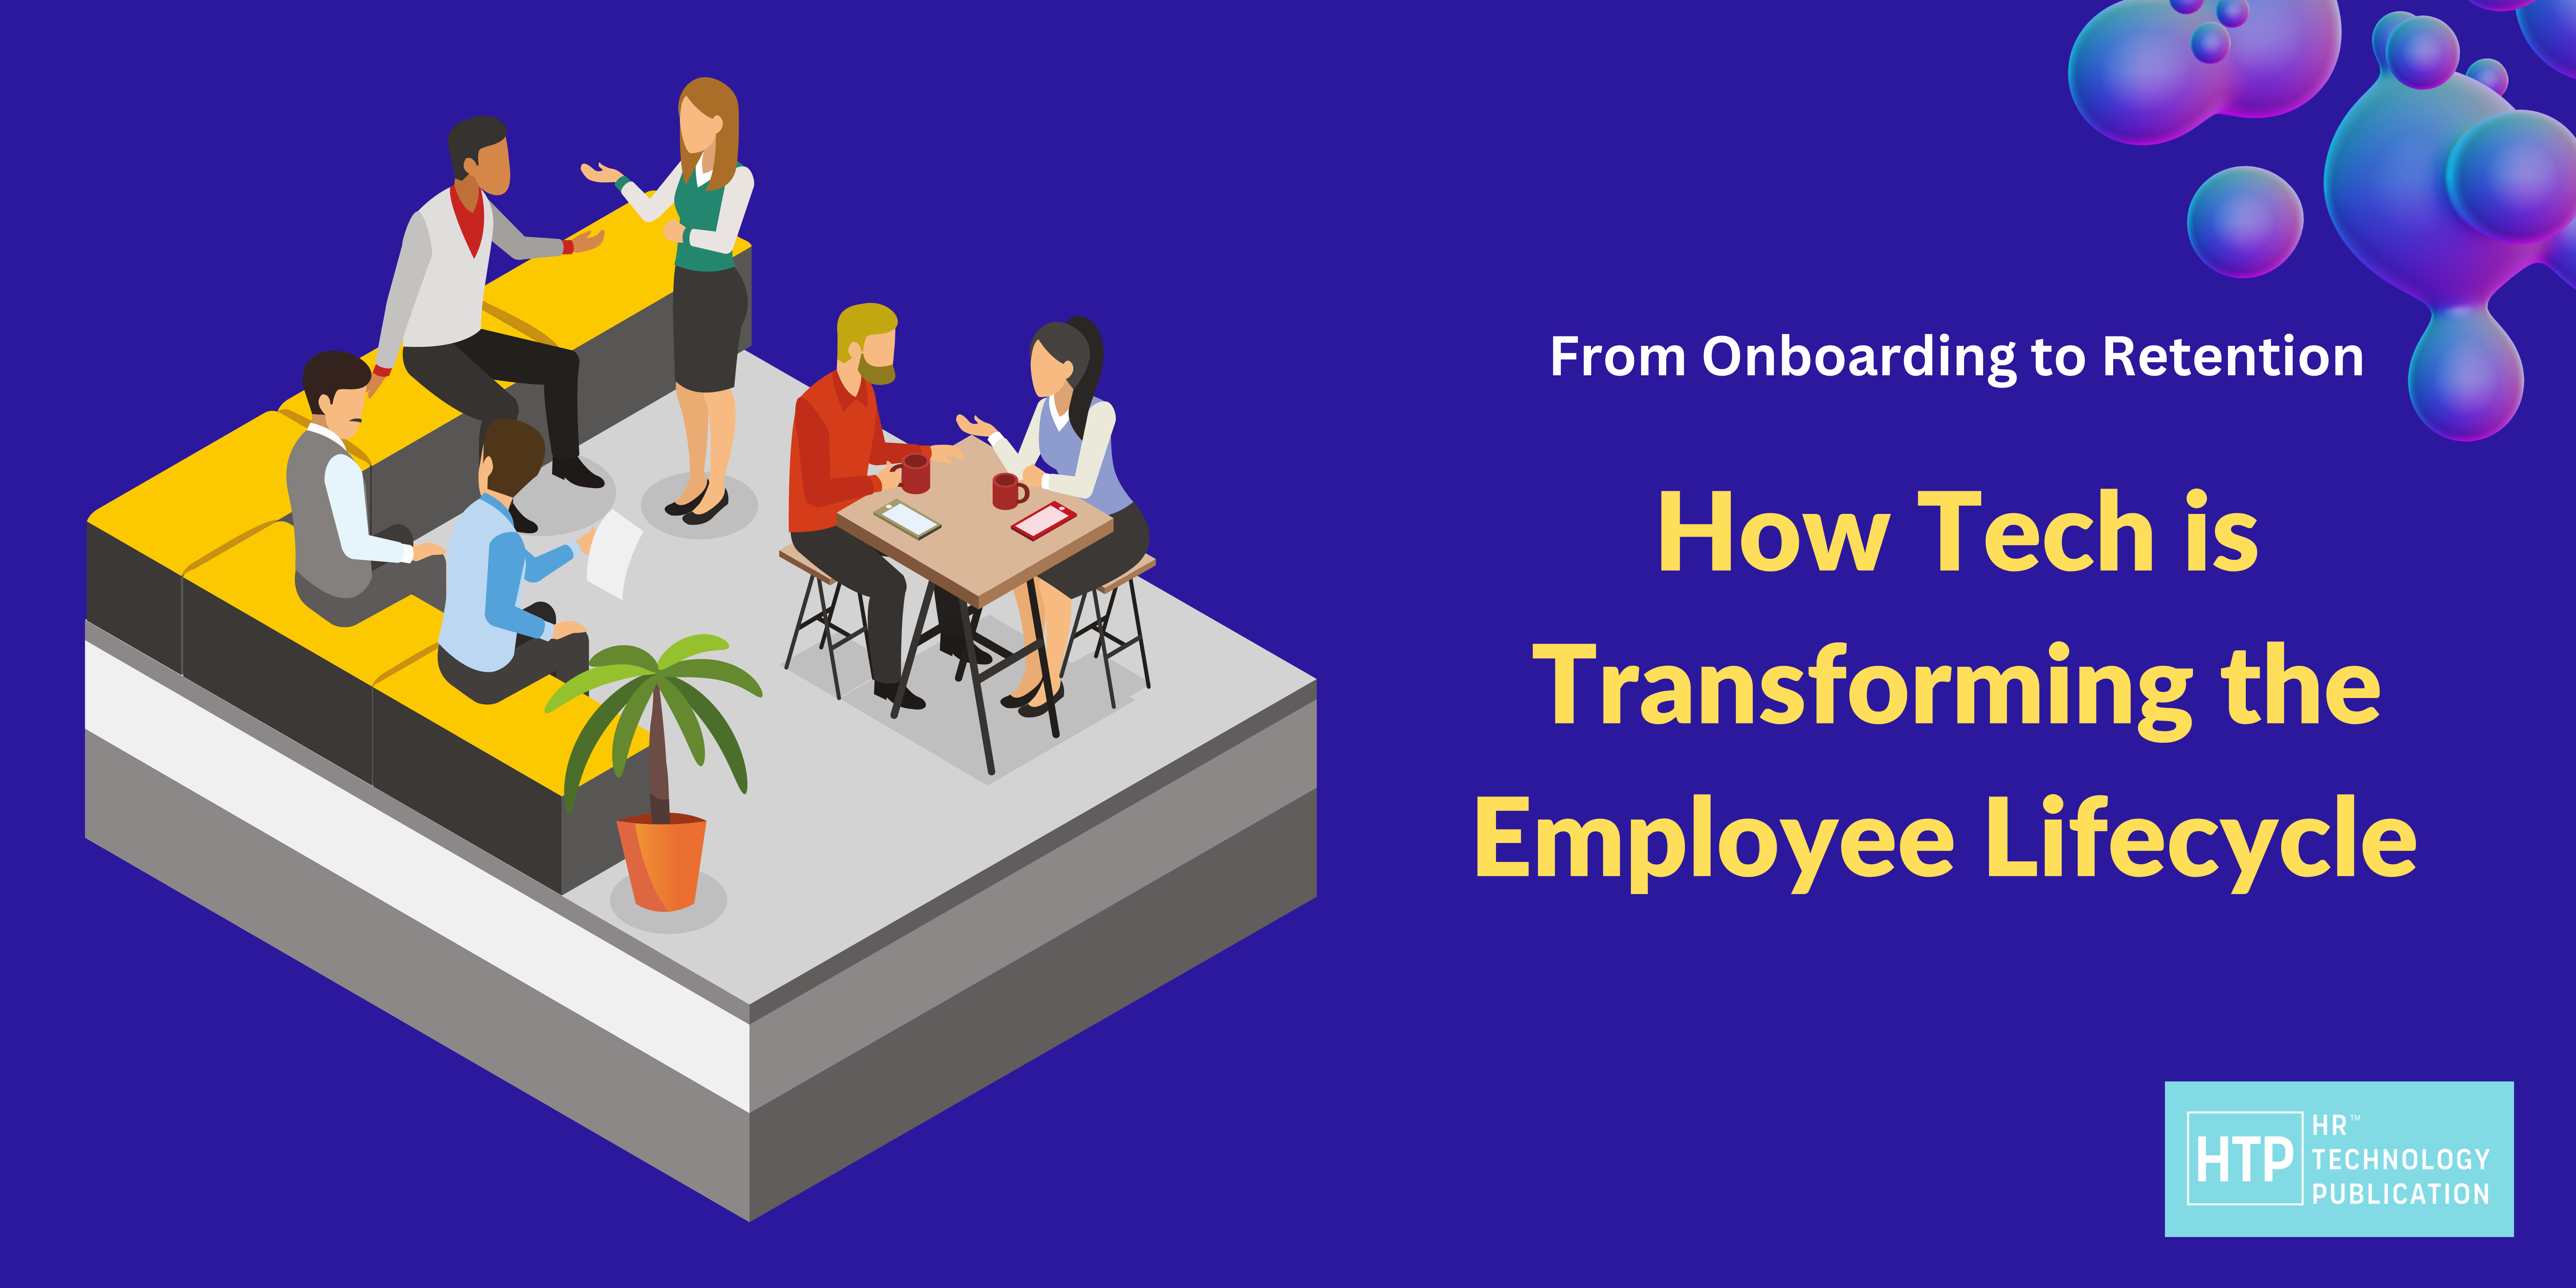 From Onboarding to Retention: How Tech is Transforming the Employee Lifecycle 